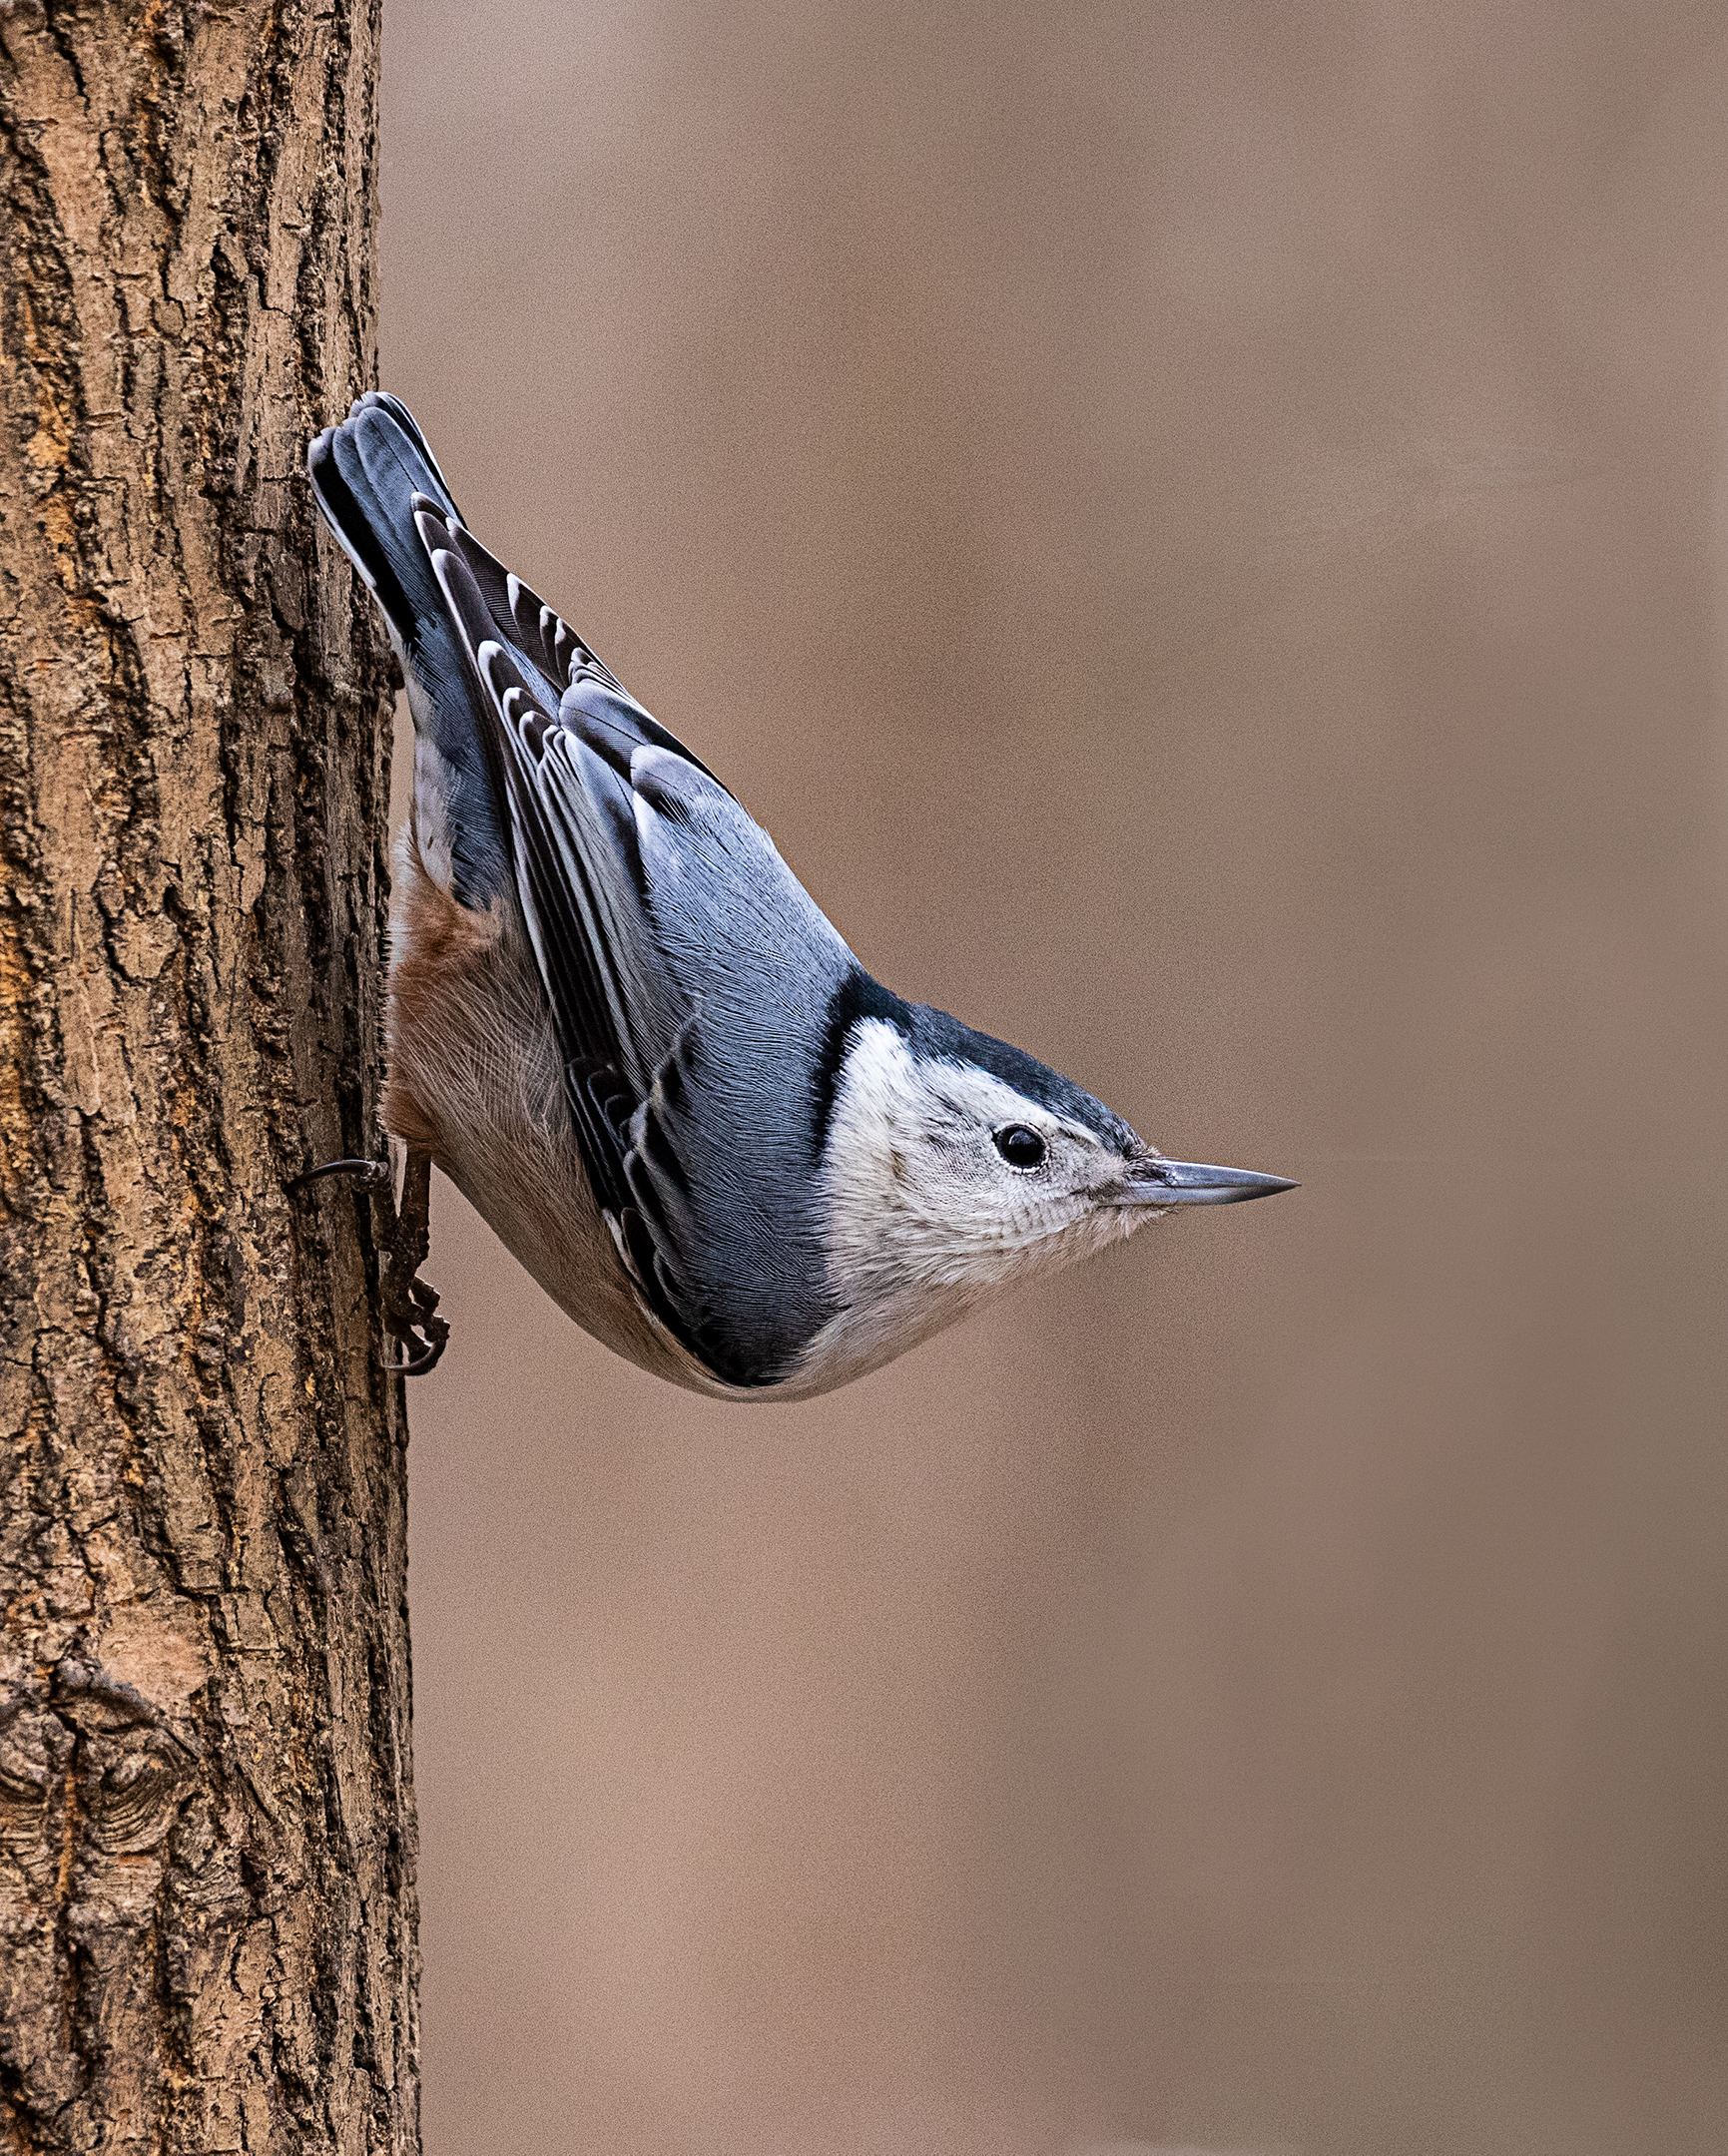 Nuthatch sull'albero....